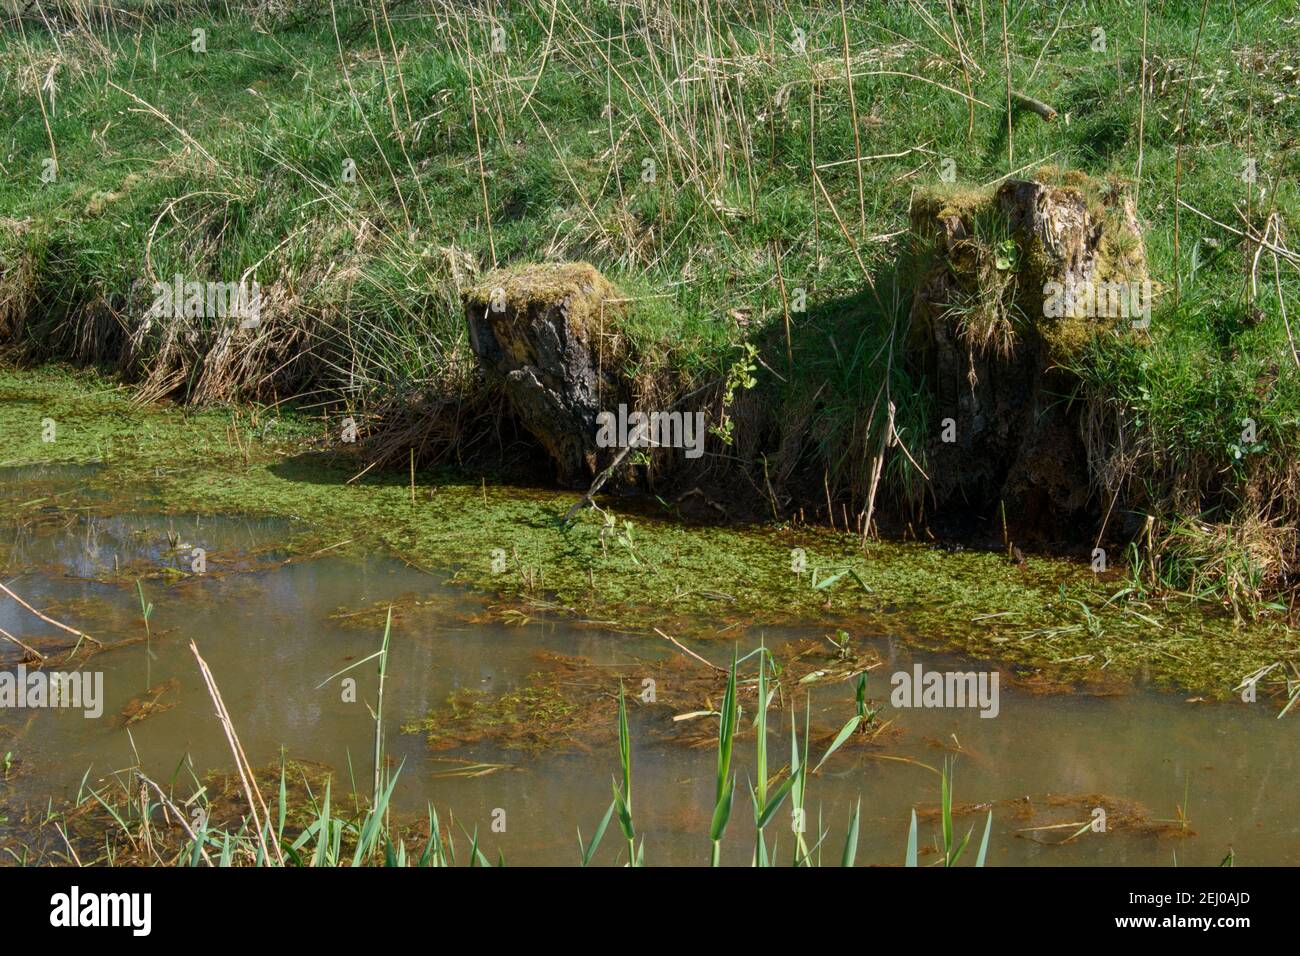 Ditch or stream flows through a meadow. Tree stumps overgrown with moss stand on the embankment. Stock Photo